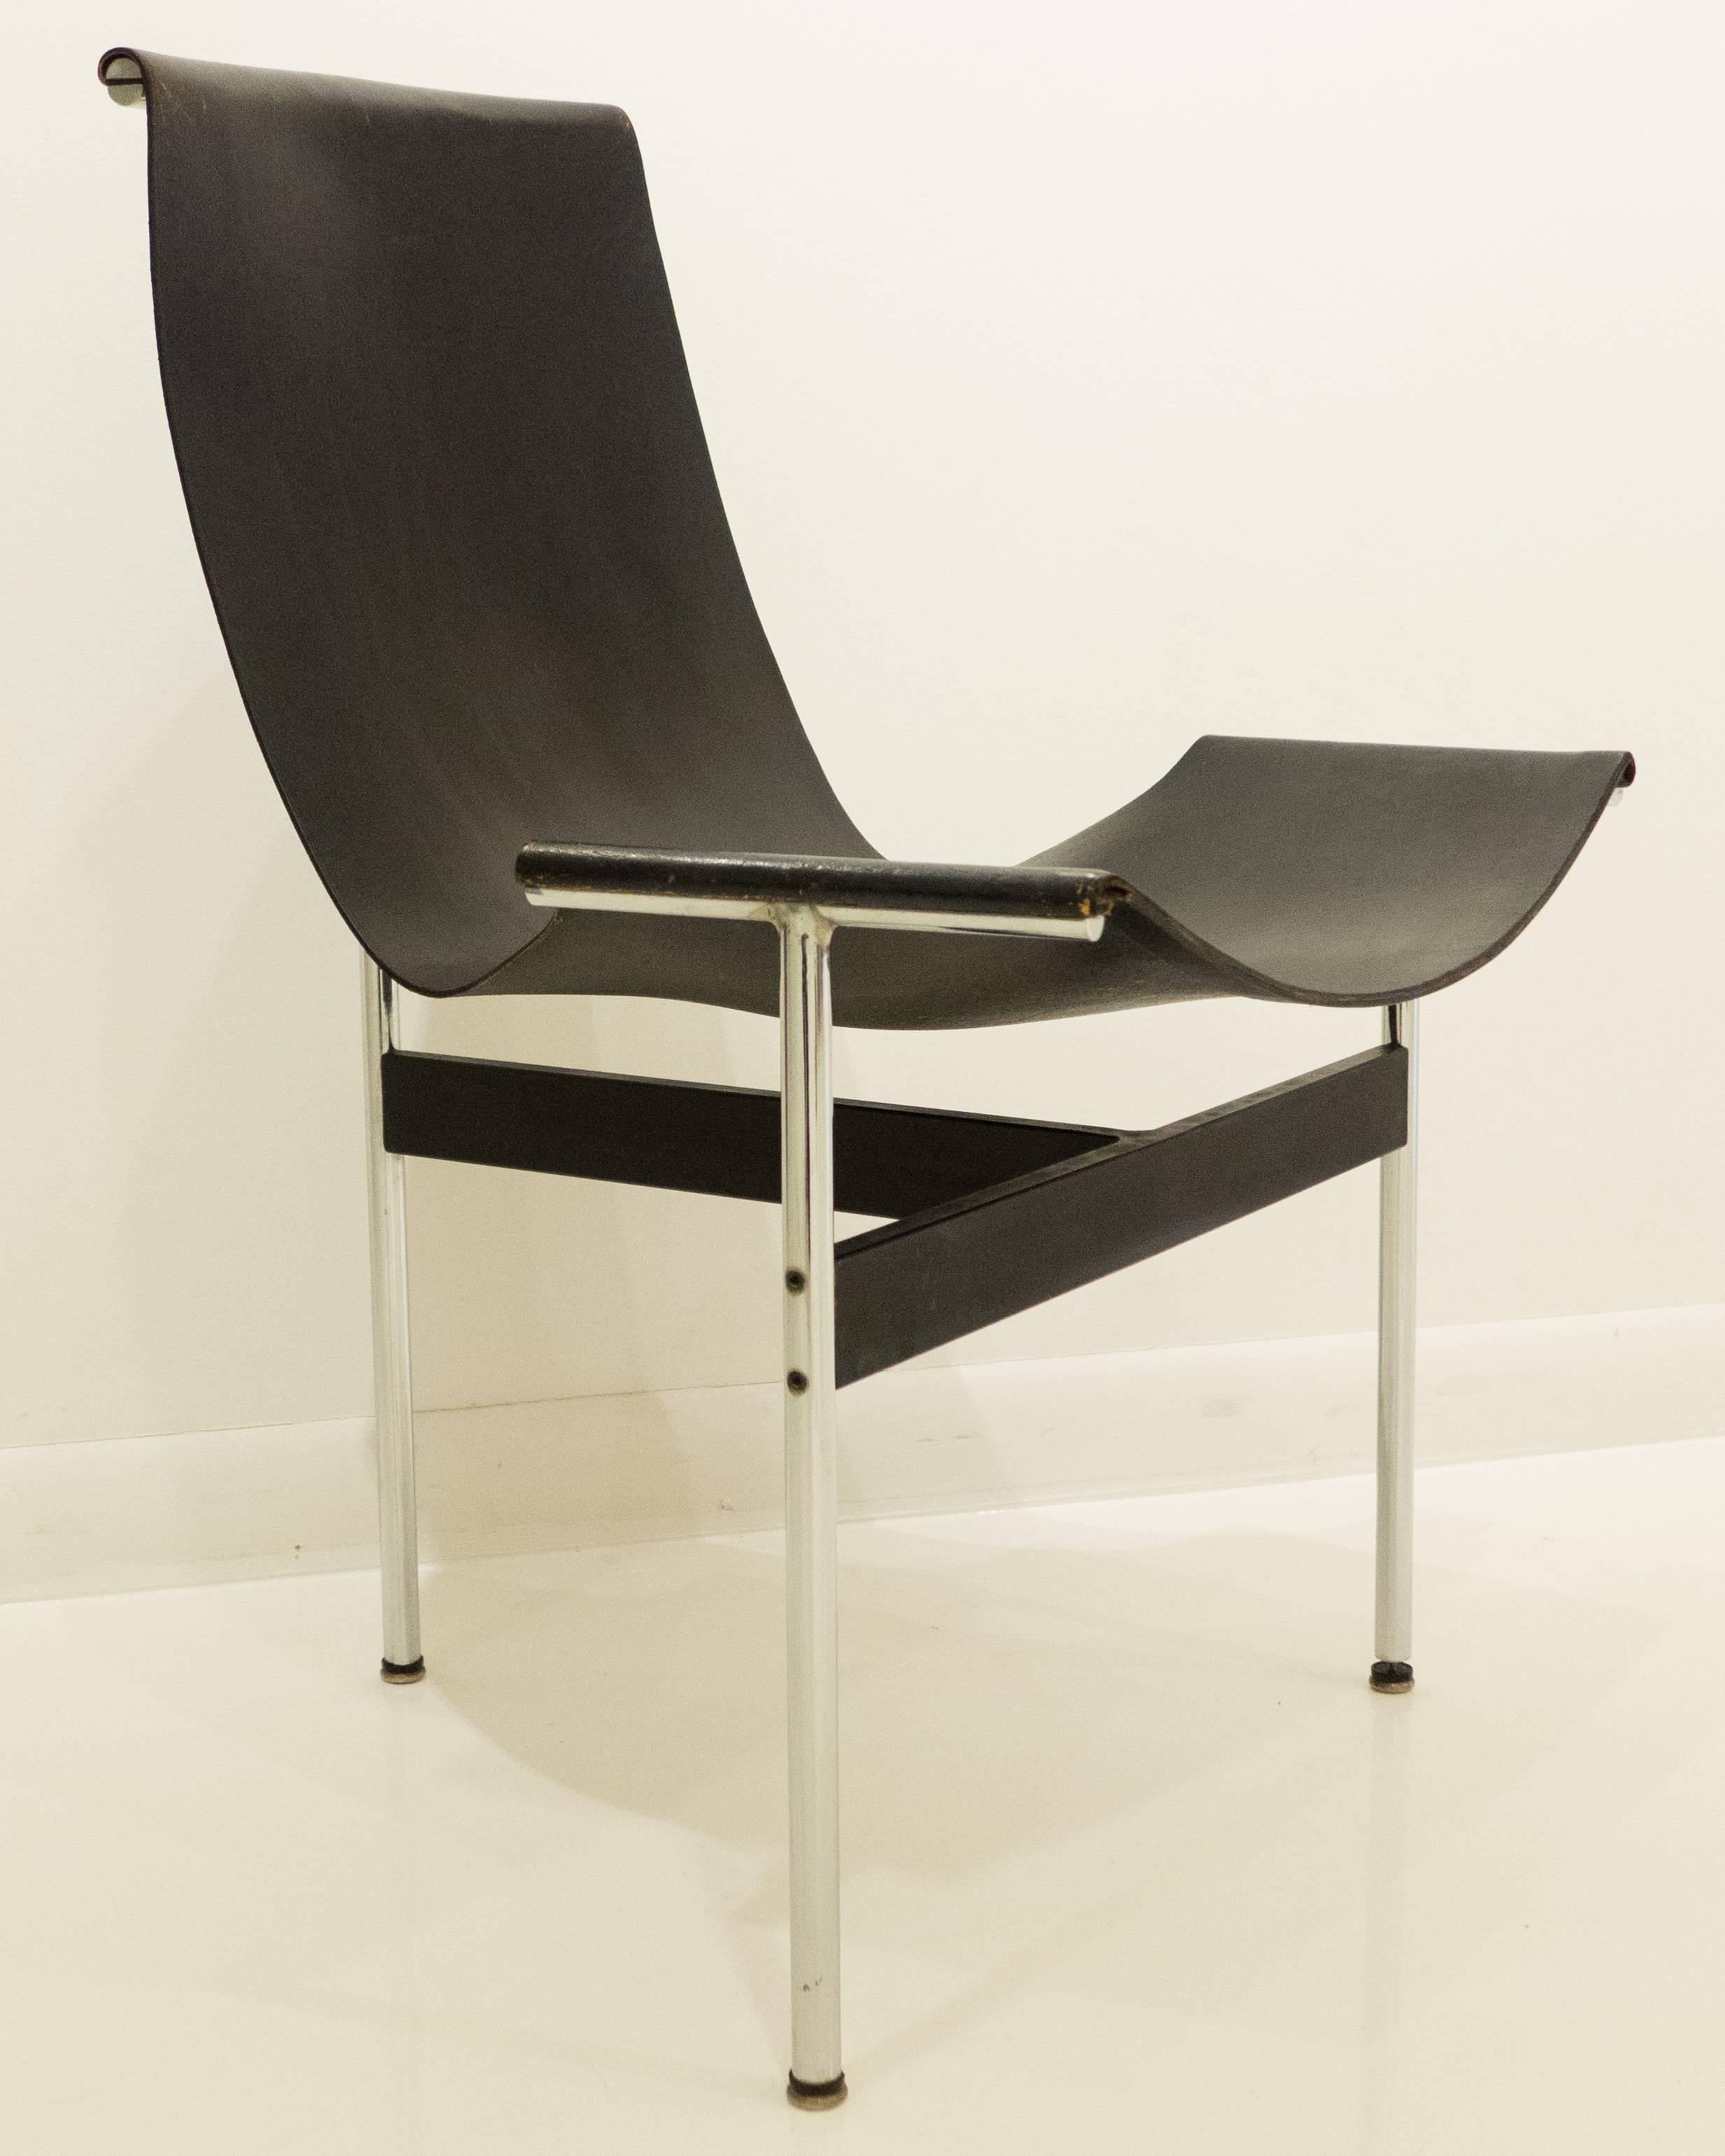 Early production T-chair in chrome-plated and enameled steel with original black leather sling, designed by Pratt alums William Katavolos, Ross Littell, and Douglas Kelley. A cornerstone of the acclaimed Laverne International 